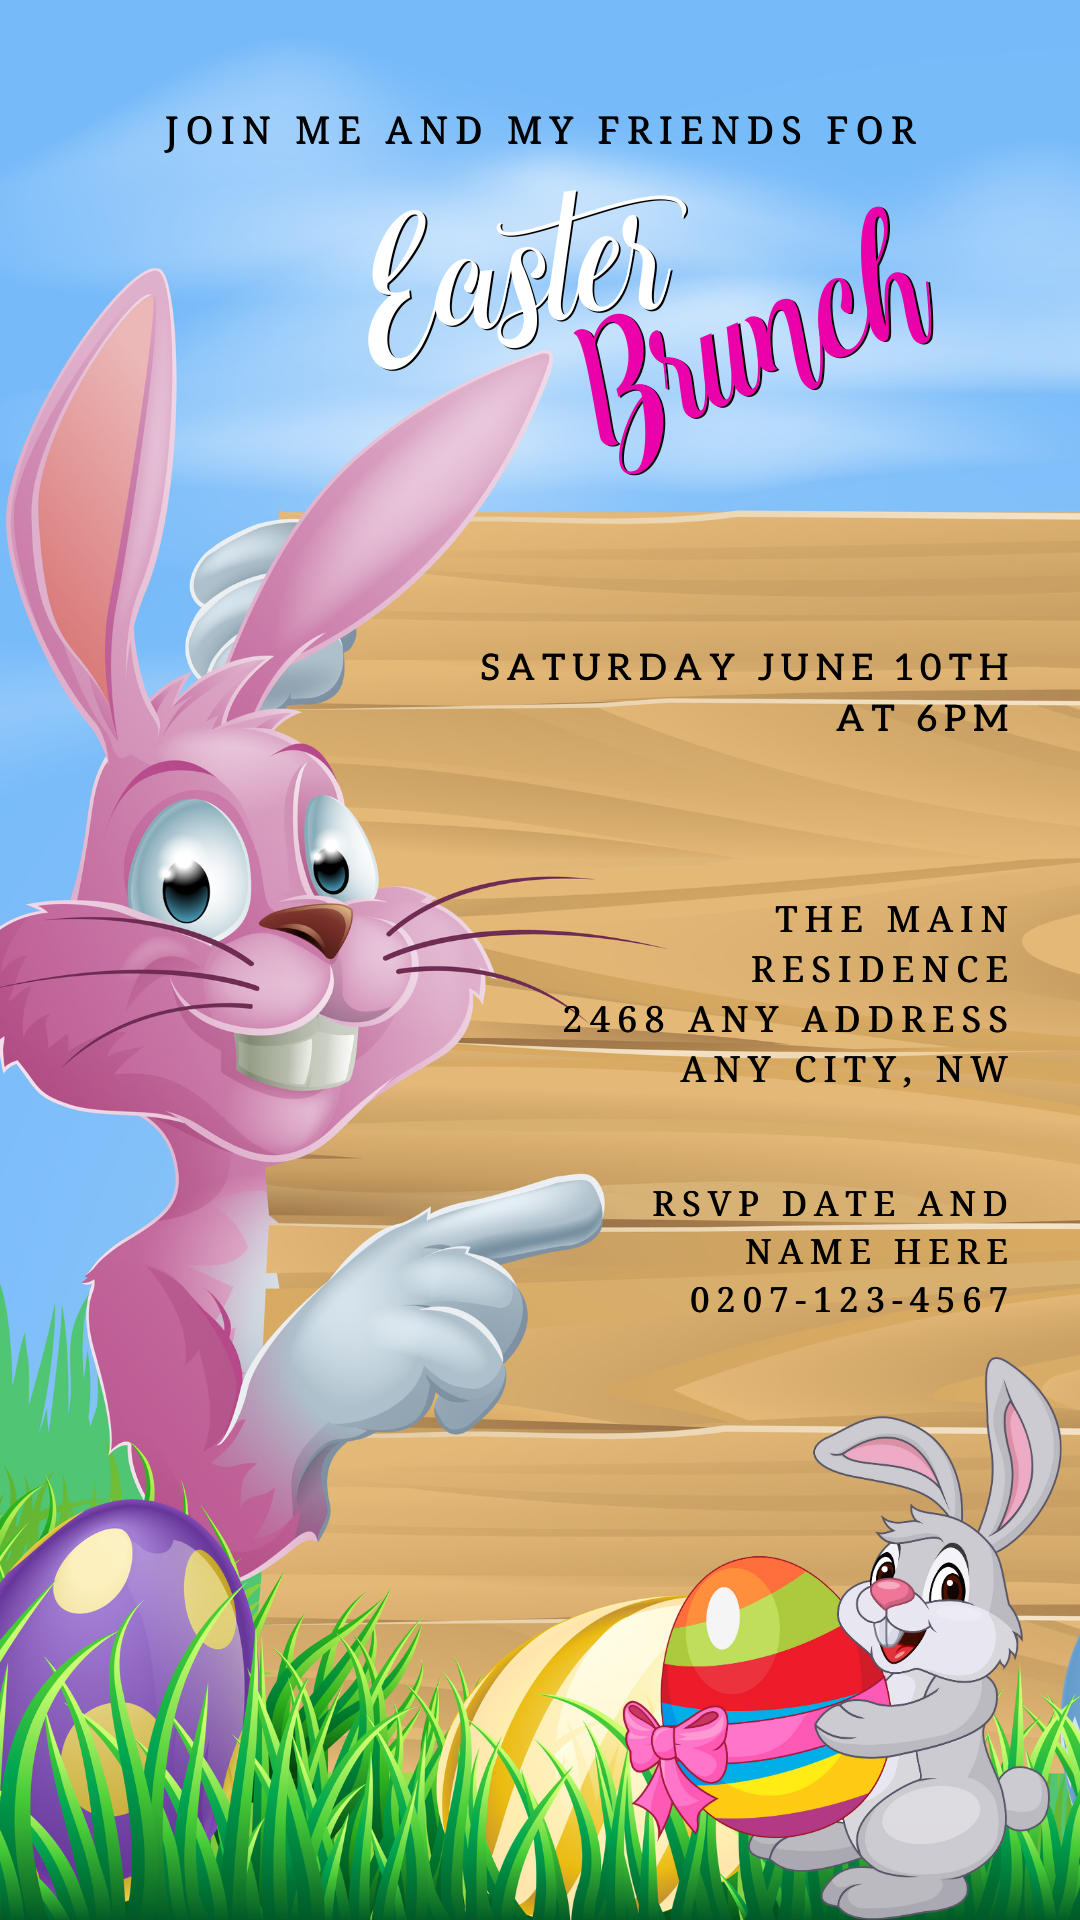 Cartoon bunny pointing at wooden sign with colorful egg, promoting the Pink Easter Bunny & Friends | Easter Brunch Barbeque Evite, customizable via Canva for digital invitations.